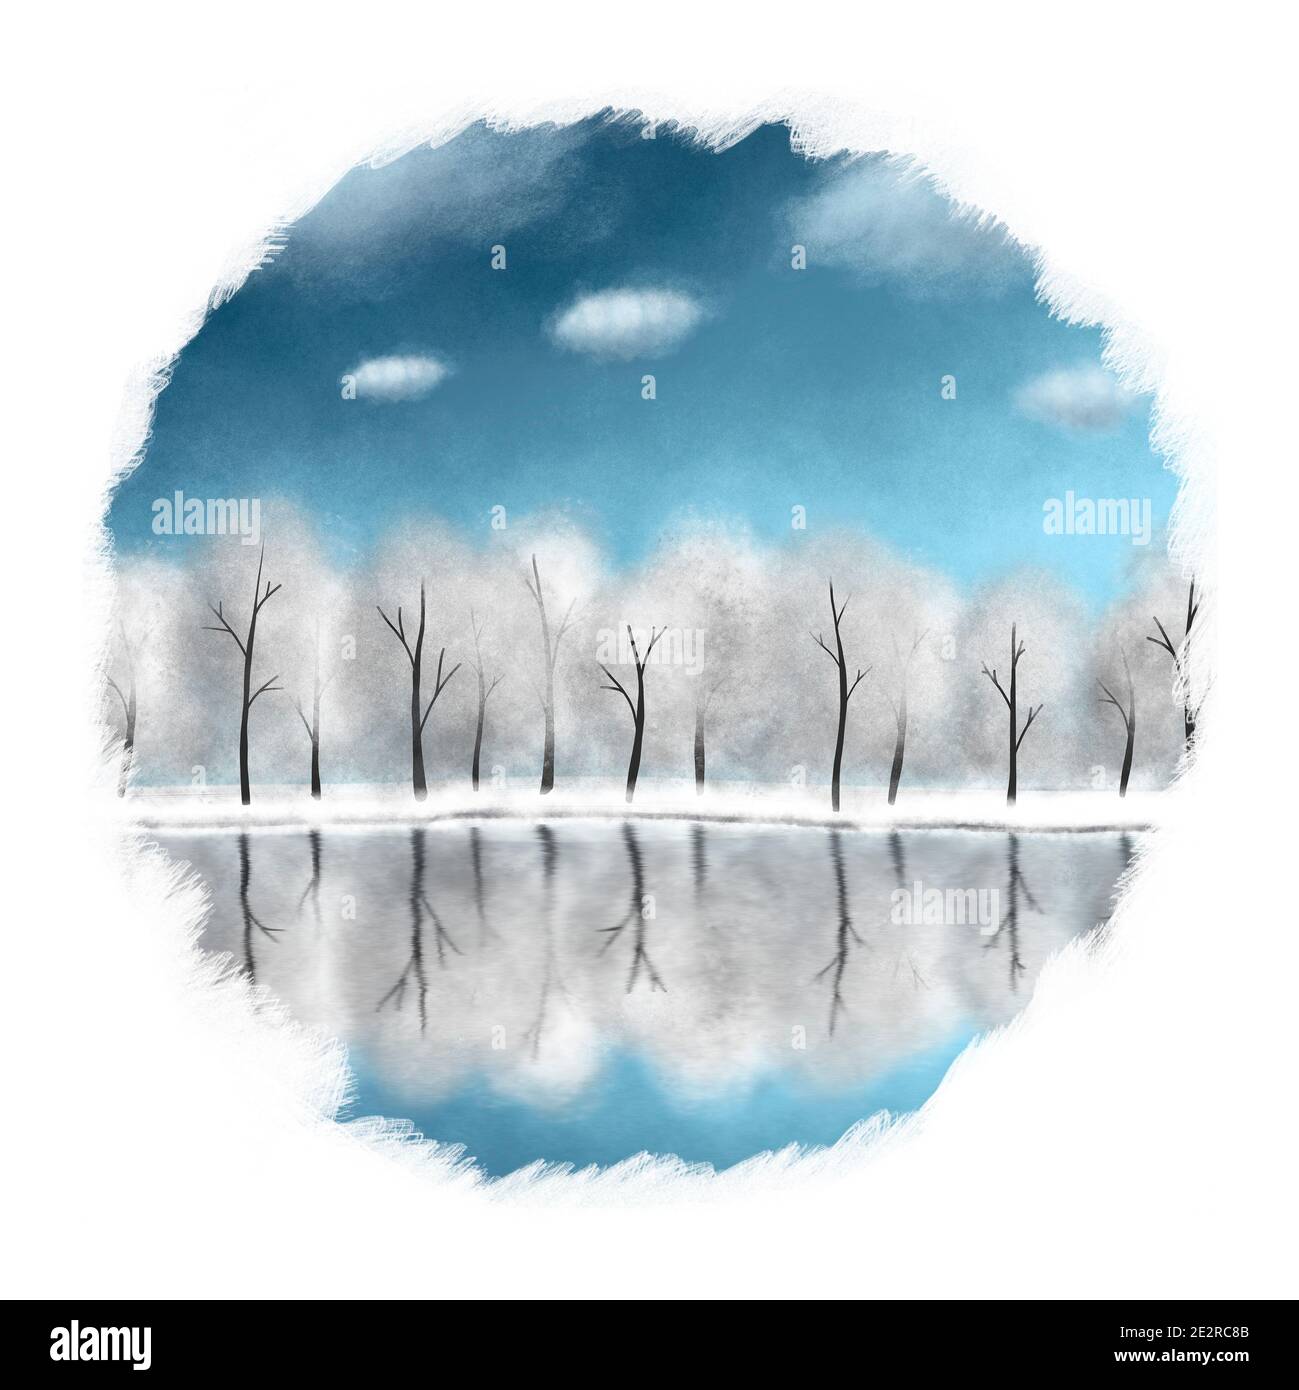 Watercolor winter landscape of forest and lake in white and blue tones. The illustration is framed. Stock Photo